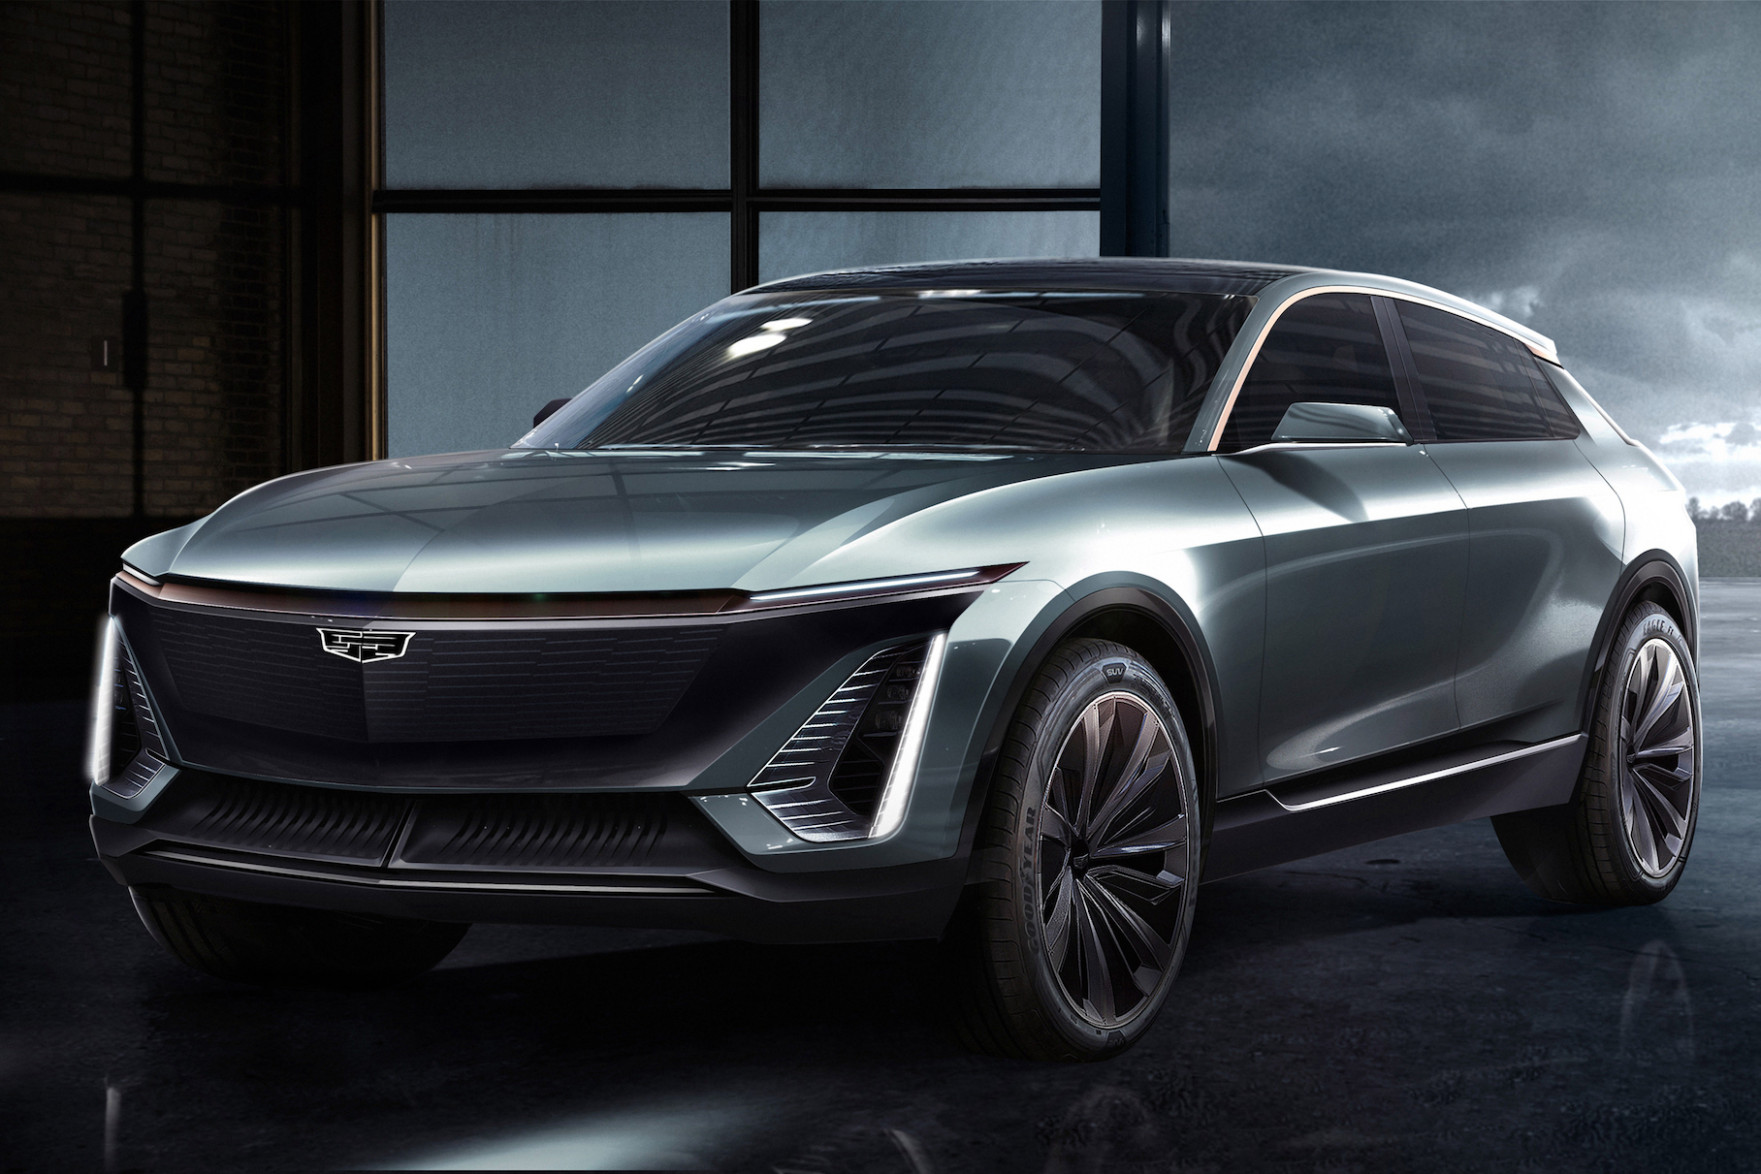 Performance 2022 Cadillac Deville Coupe